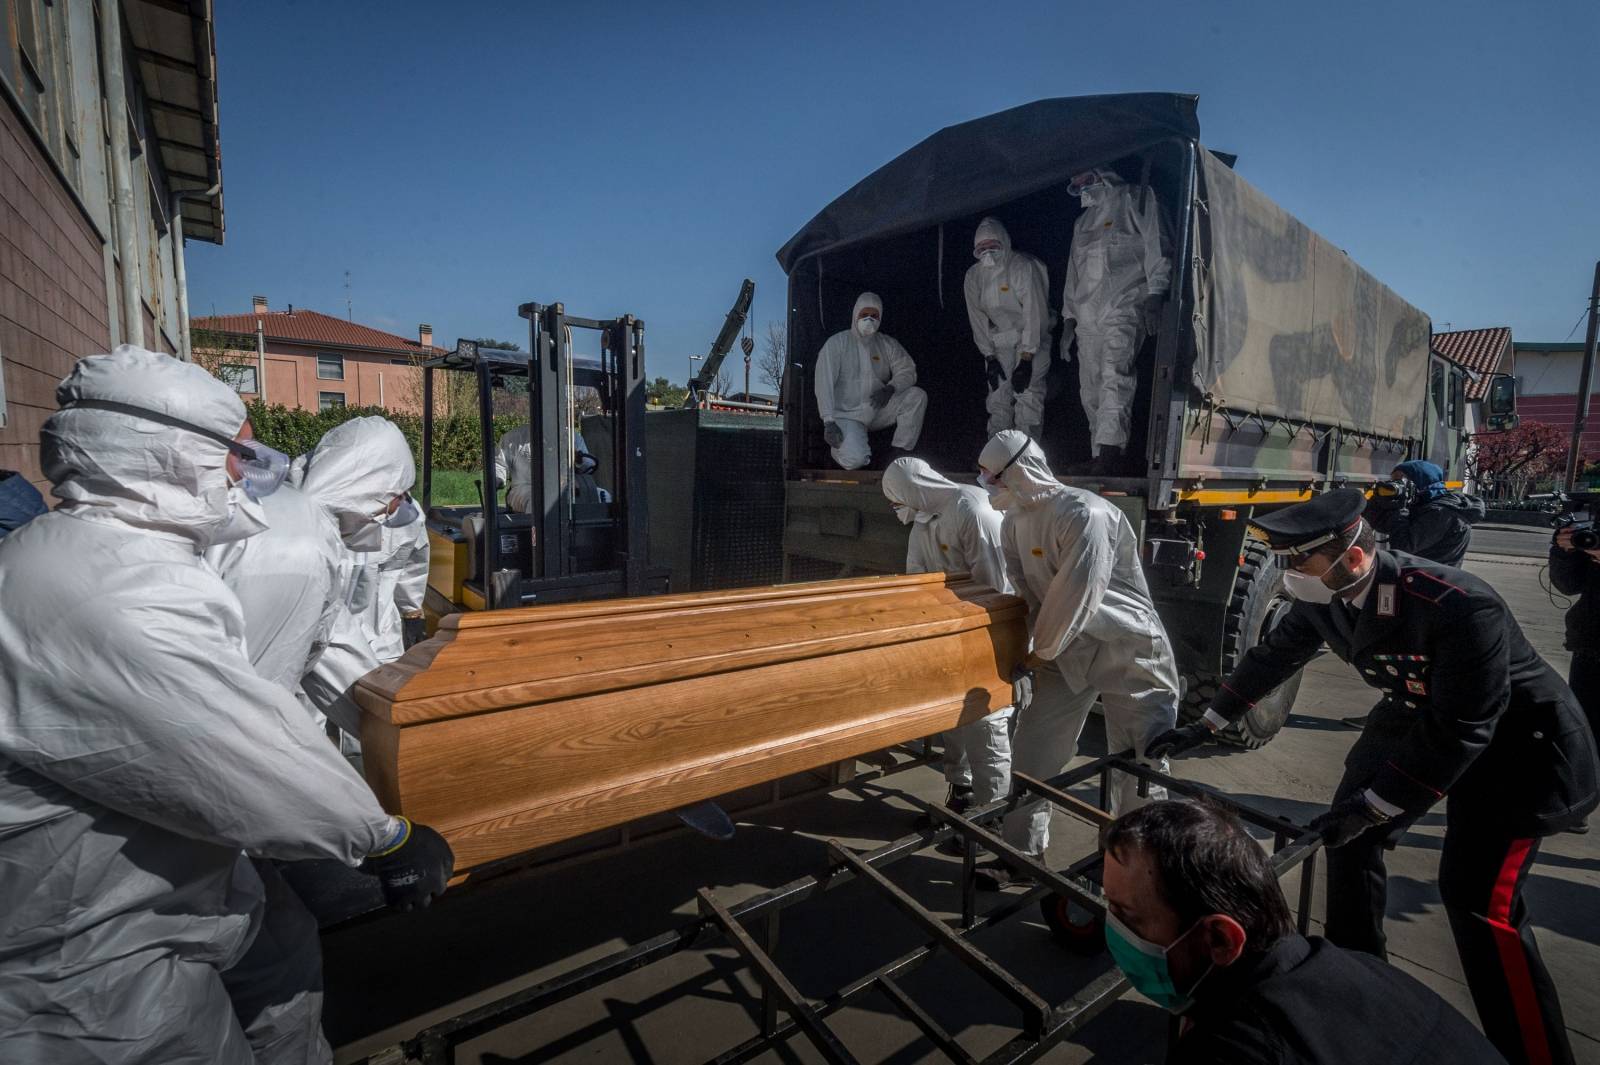 San Pietro bridge. Military and medical personnel of the Army together with the Carabinieri transport the coffins with the use of six trucks from a depot in Ponte San Pietro due to emergency COVID19 Coronavirus